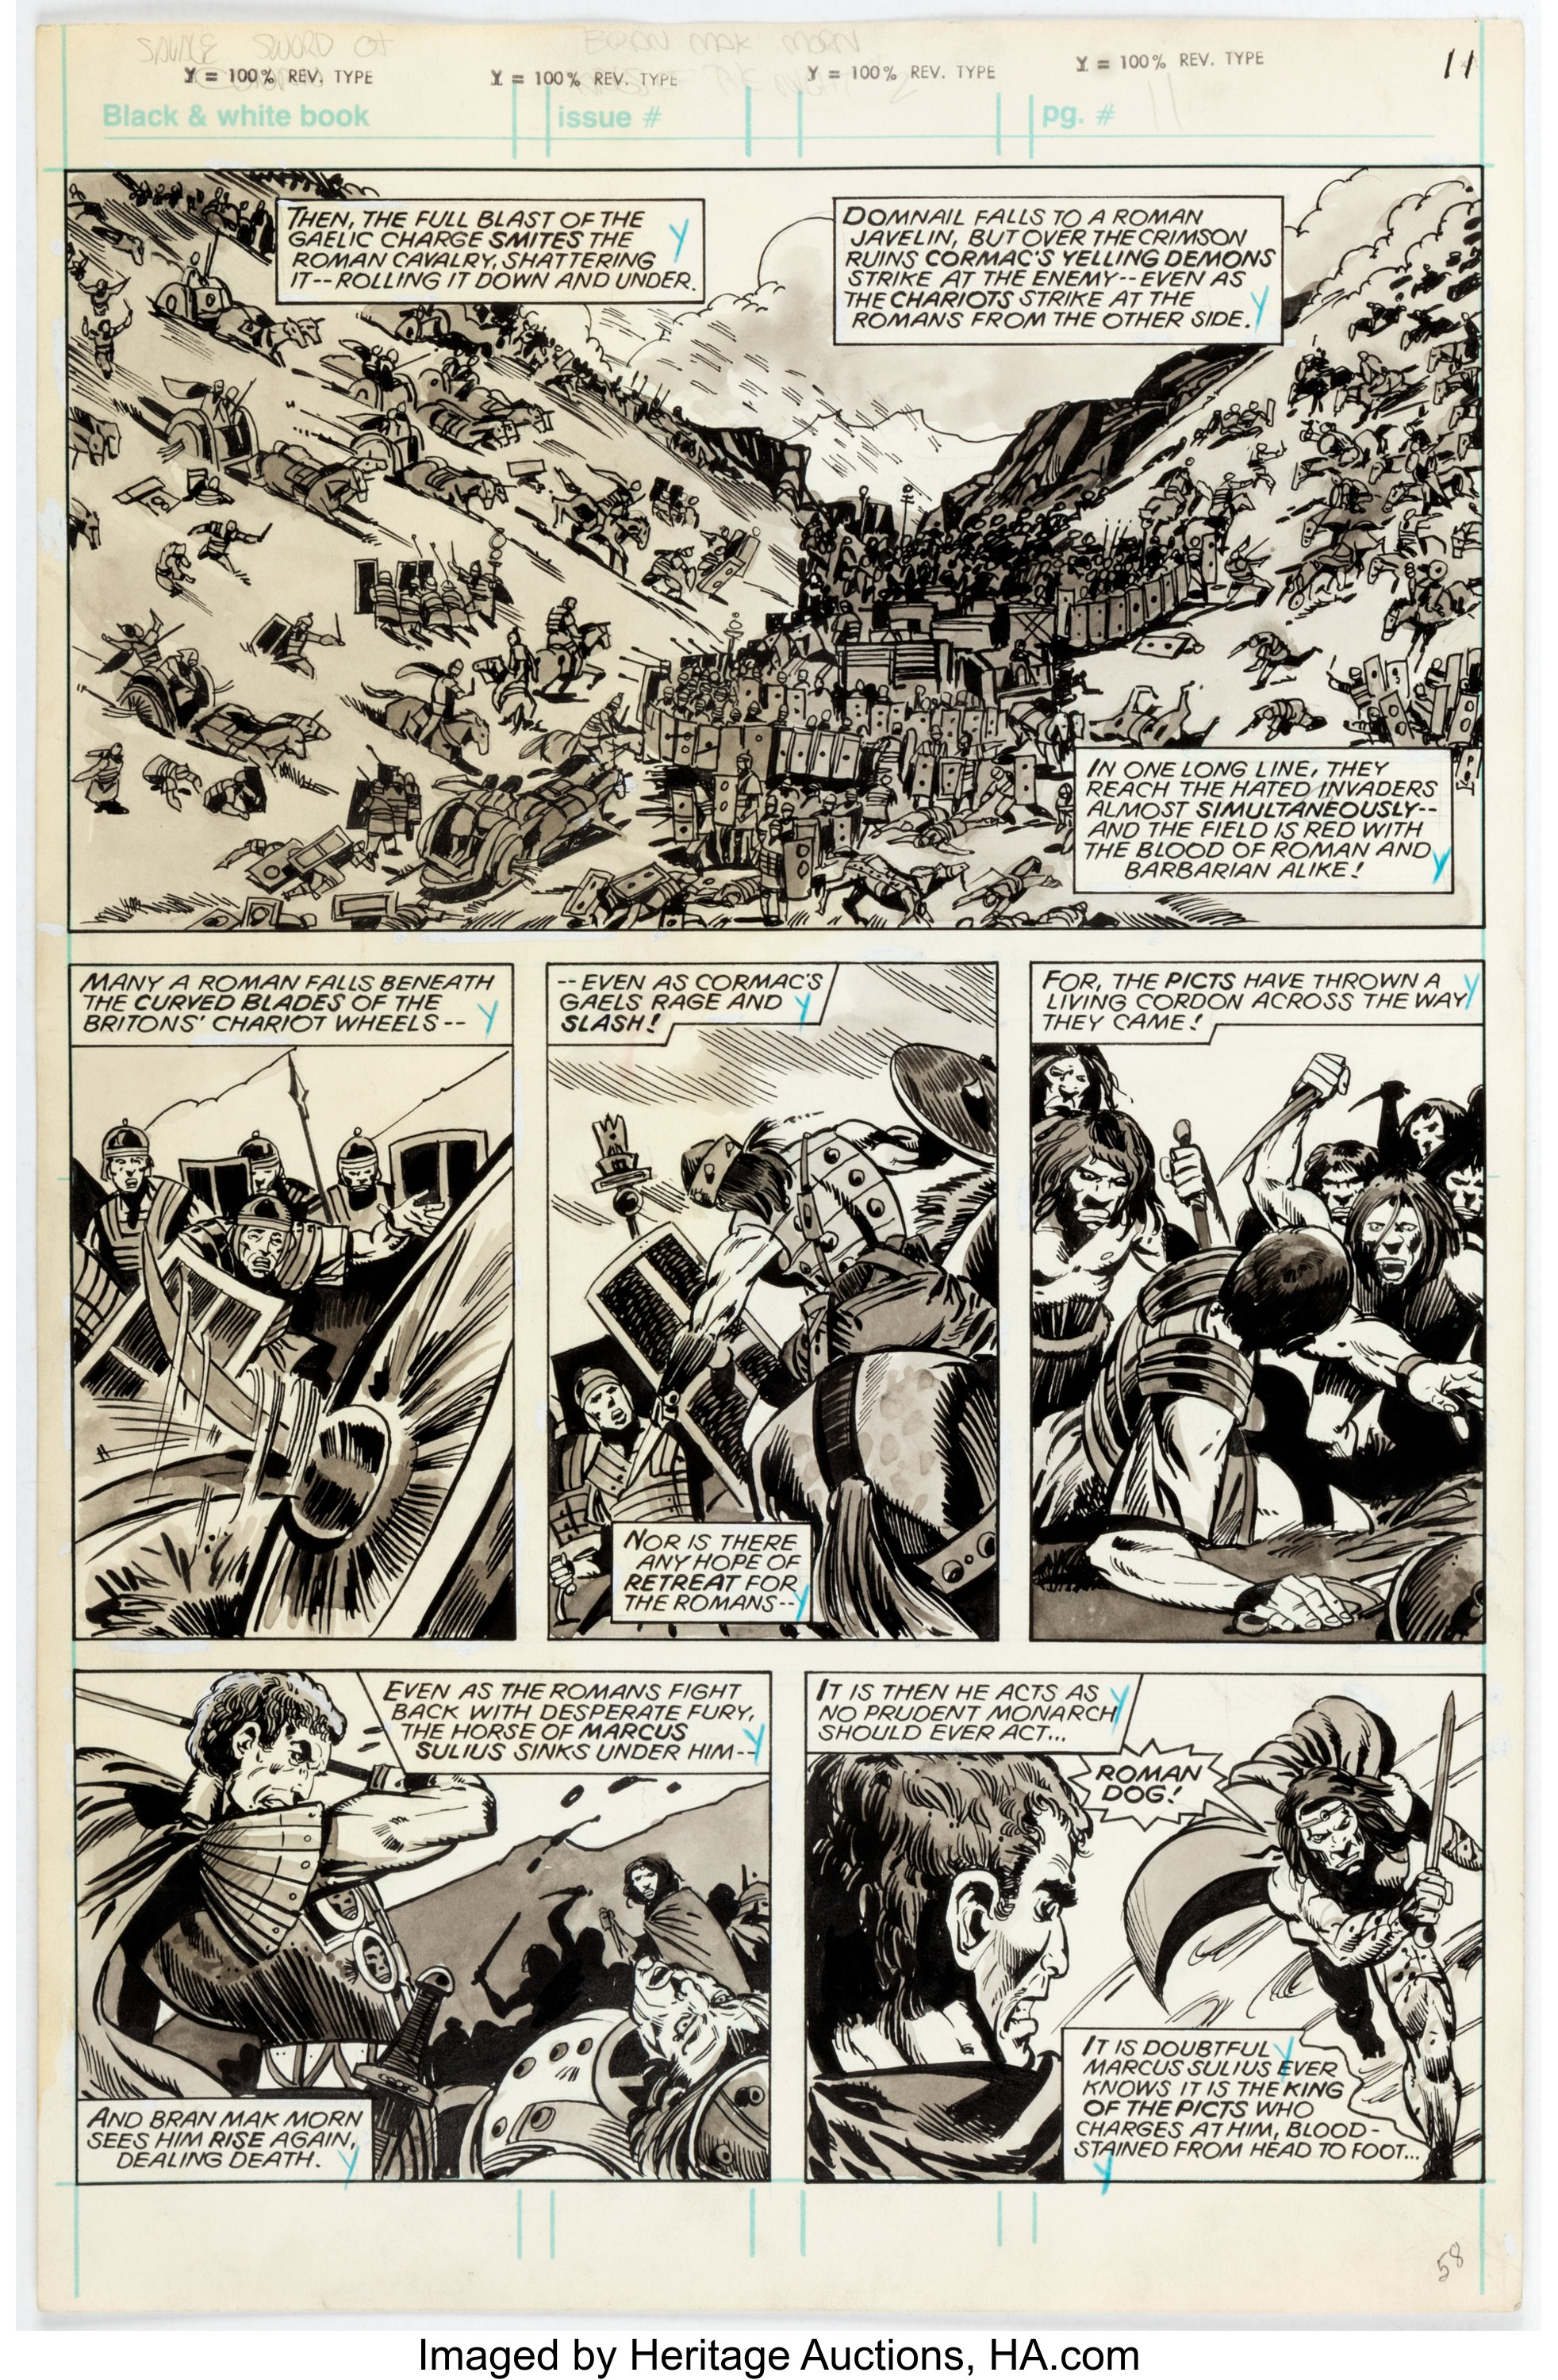 Download David Wenzel Savage Sword Of Conan 43 Story Page 11 Original Art Lot 11717 Heritage Auctions